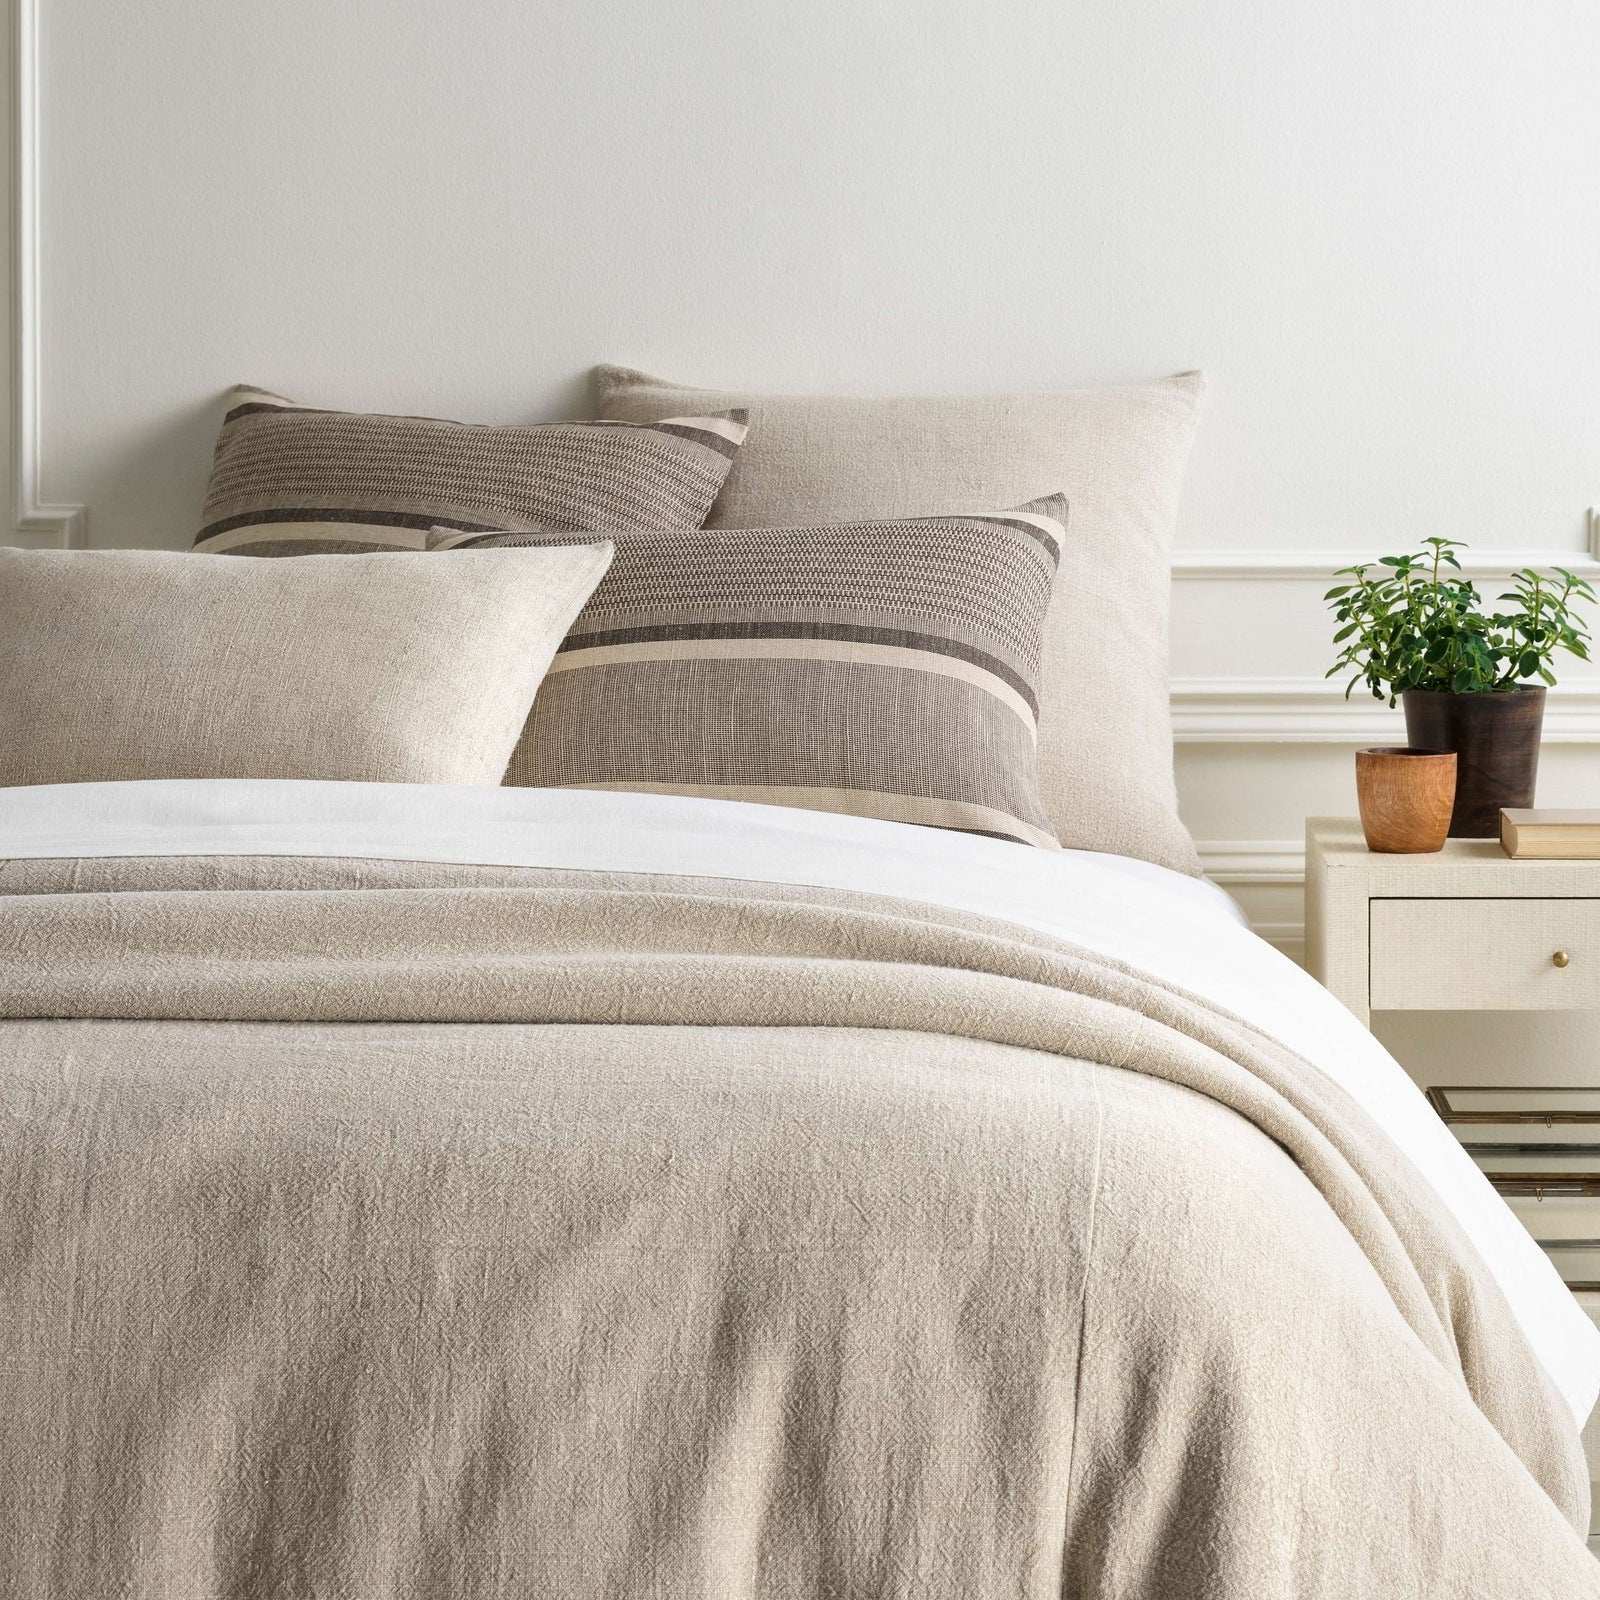 Pine Cone Hill Stone Washed Linen Duvet Cover